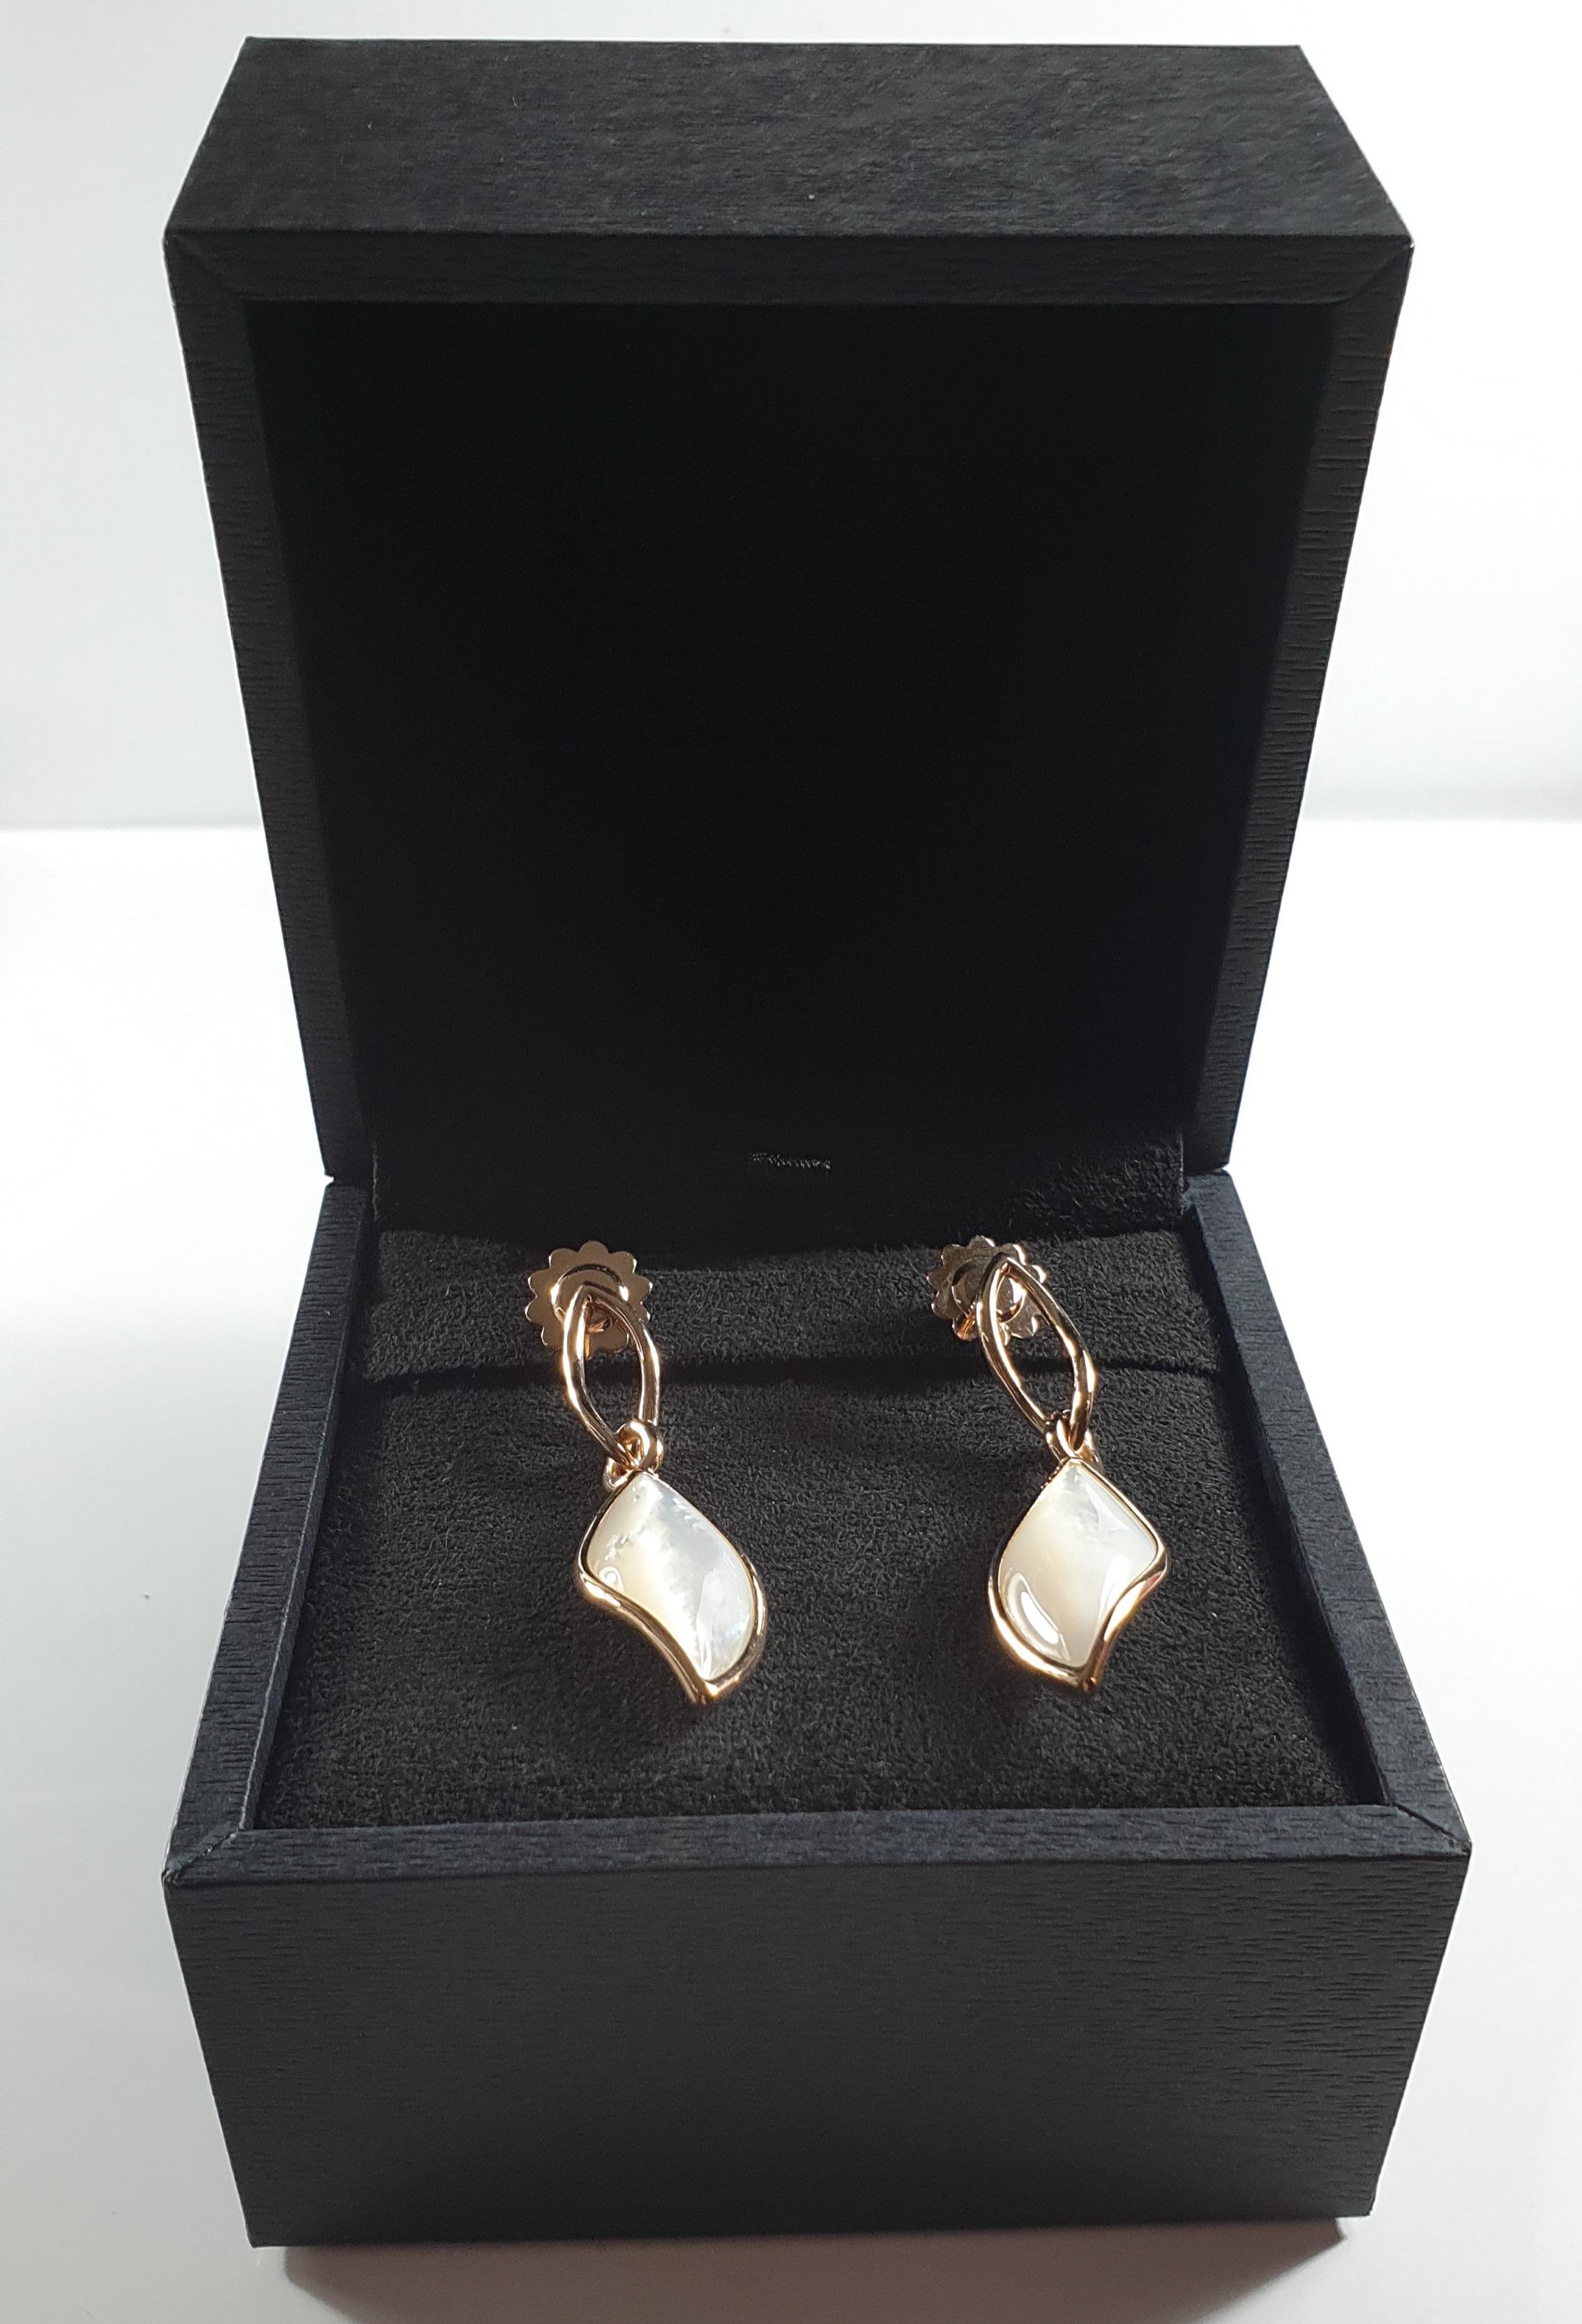 Mattioli Navettes Earrings in 18 K Rose Gold and Mother of Pearl In New Condition For Sale In Bilbao, ES